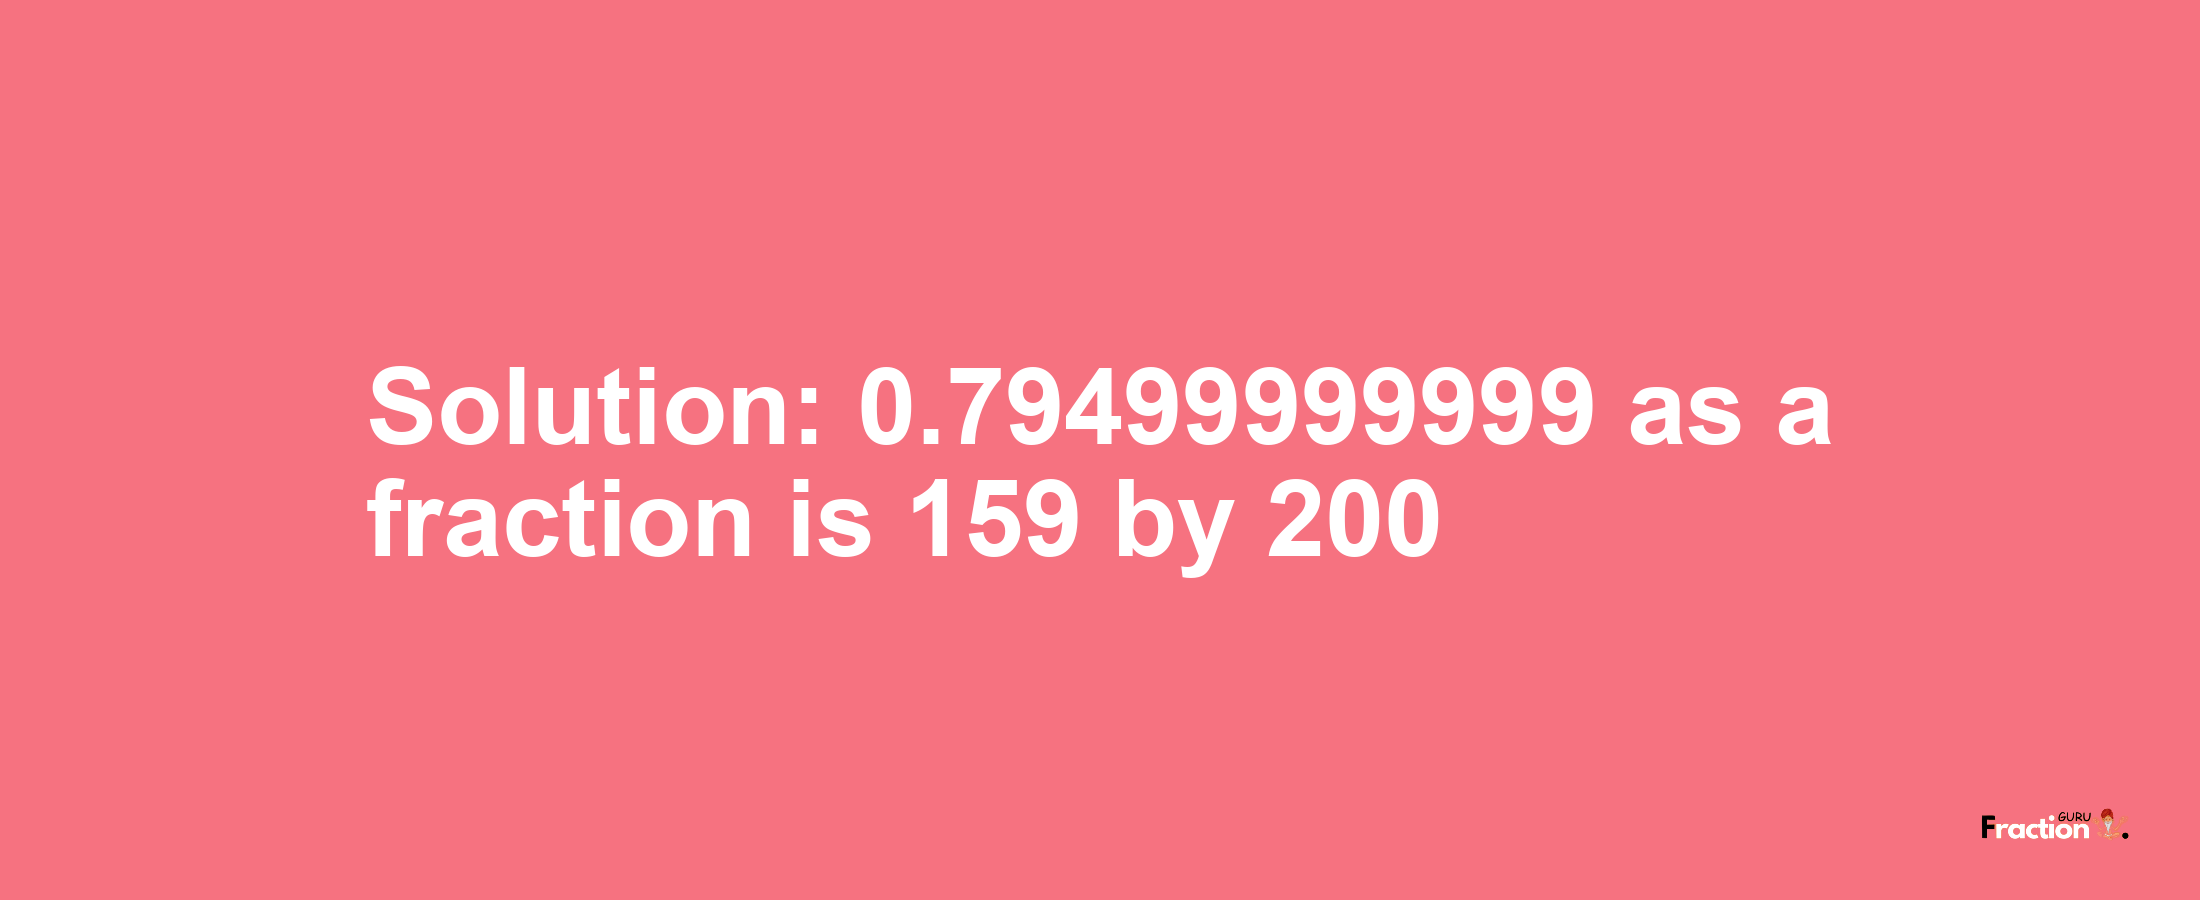 Solution:0.79499999999 as a fraction is 159/200